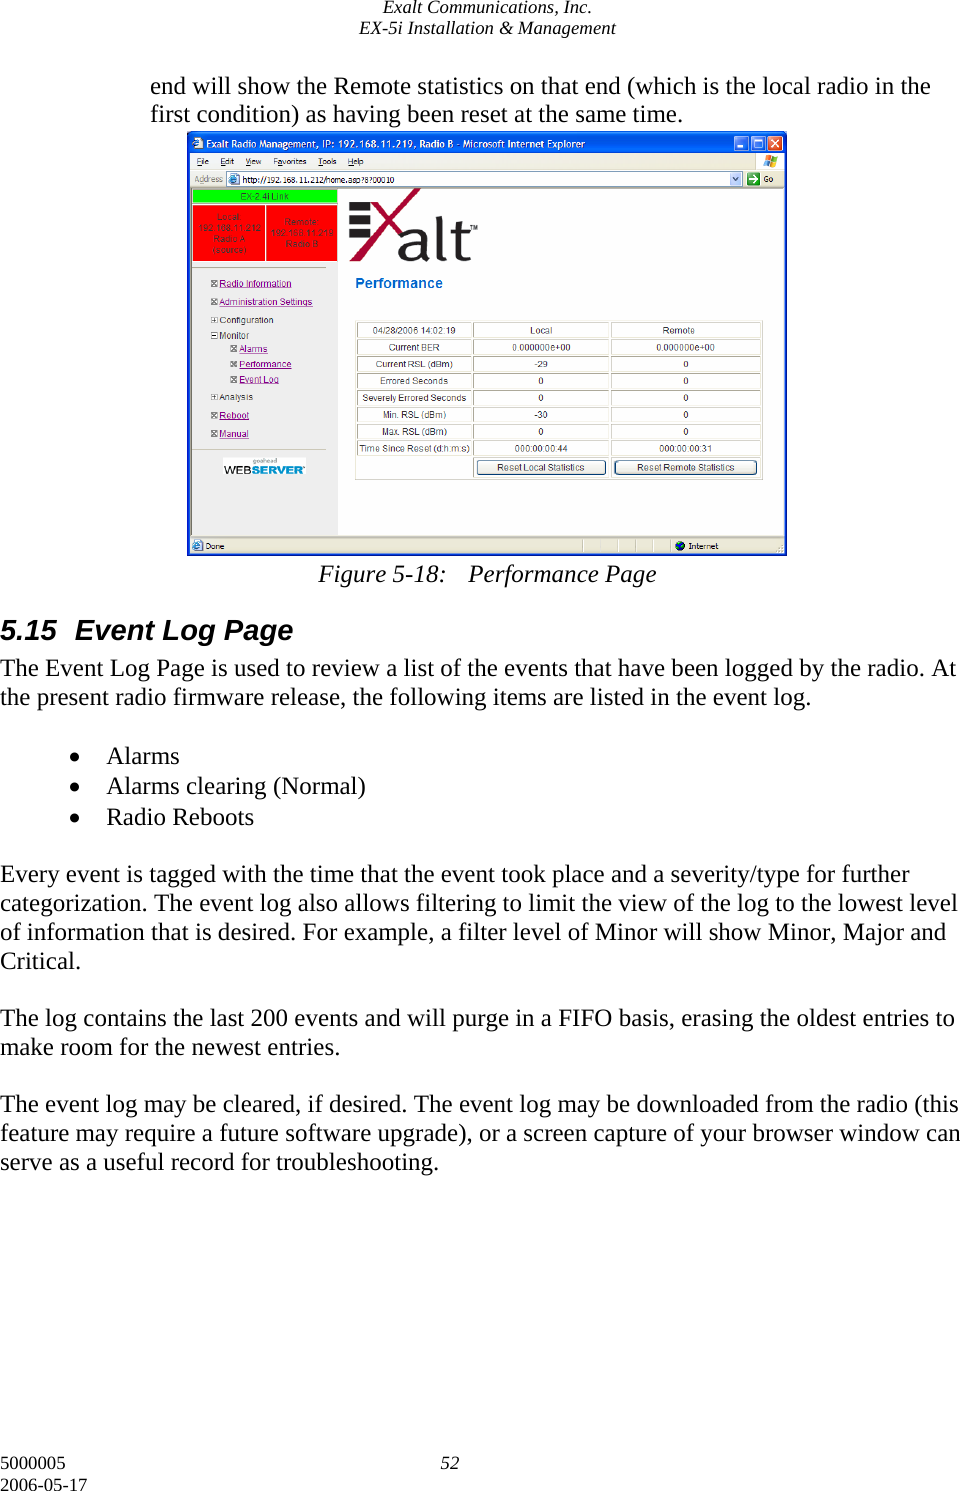 Exalt Communications, Inc. EX-5i Installation &amp; Management 5000005  52 2006-05-17 end will show the Remote statistics on that end (which is the local radio in the first condition) as having been reset at the same time.                Figure 5-18:  Performance Page 5.15  Event Log Page The Event Log Page is used to review a list of the events that have been logged by the radio. At the present radio firmware release, the following items are listed in the event log.  • Alarms • Alarms clearing (Normal) • Radio Reboots  Every event is tagged with the time that the event took place and a severity/type for further categorization. The event log also allows filtering to limit the view of the log to the lowest level of information that is desired. For example, a filter level of Minor will show Minor, Major and Critical.   The log contains the last 200 events and will purge in a FIFO basis, erasing the oldest entries to make room for the newest entries.  The event log may be cleared, if desired. The event log may be downloaded from the radio (this feature may require a future software upgrade), or a screen capture of your browser window can serve as a useful record for troubleshooting.         